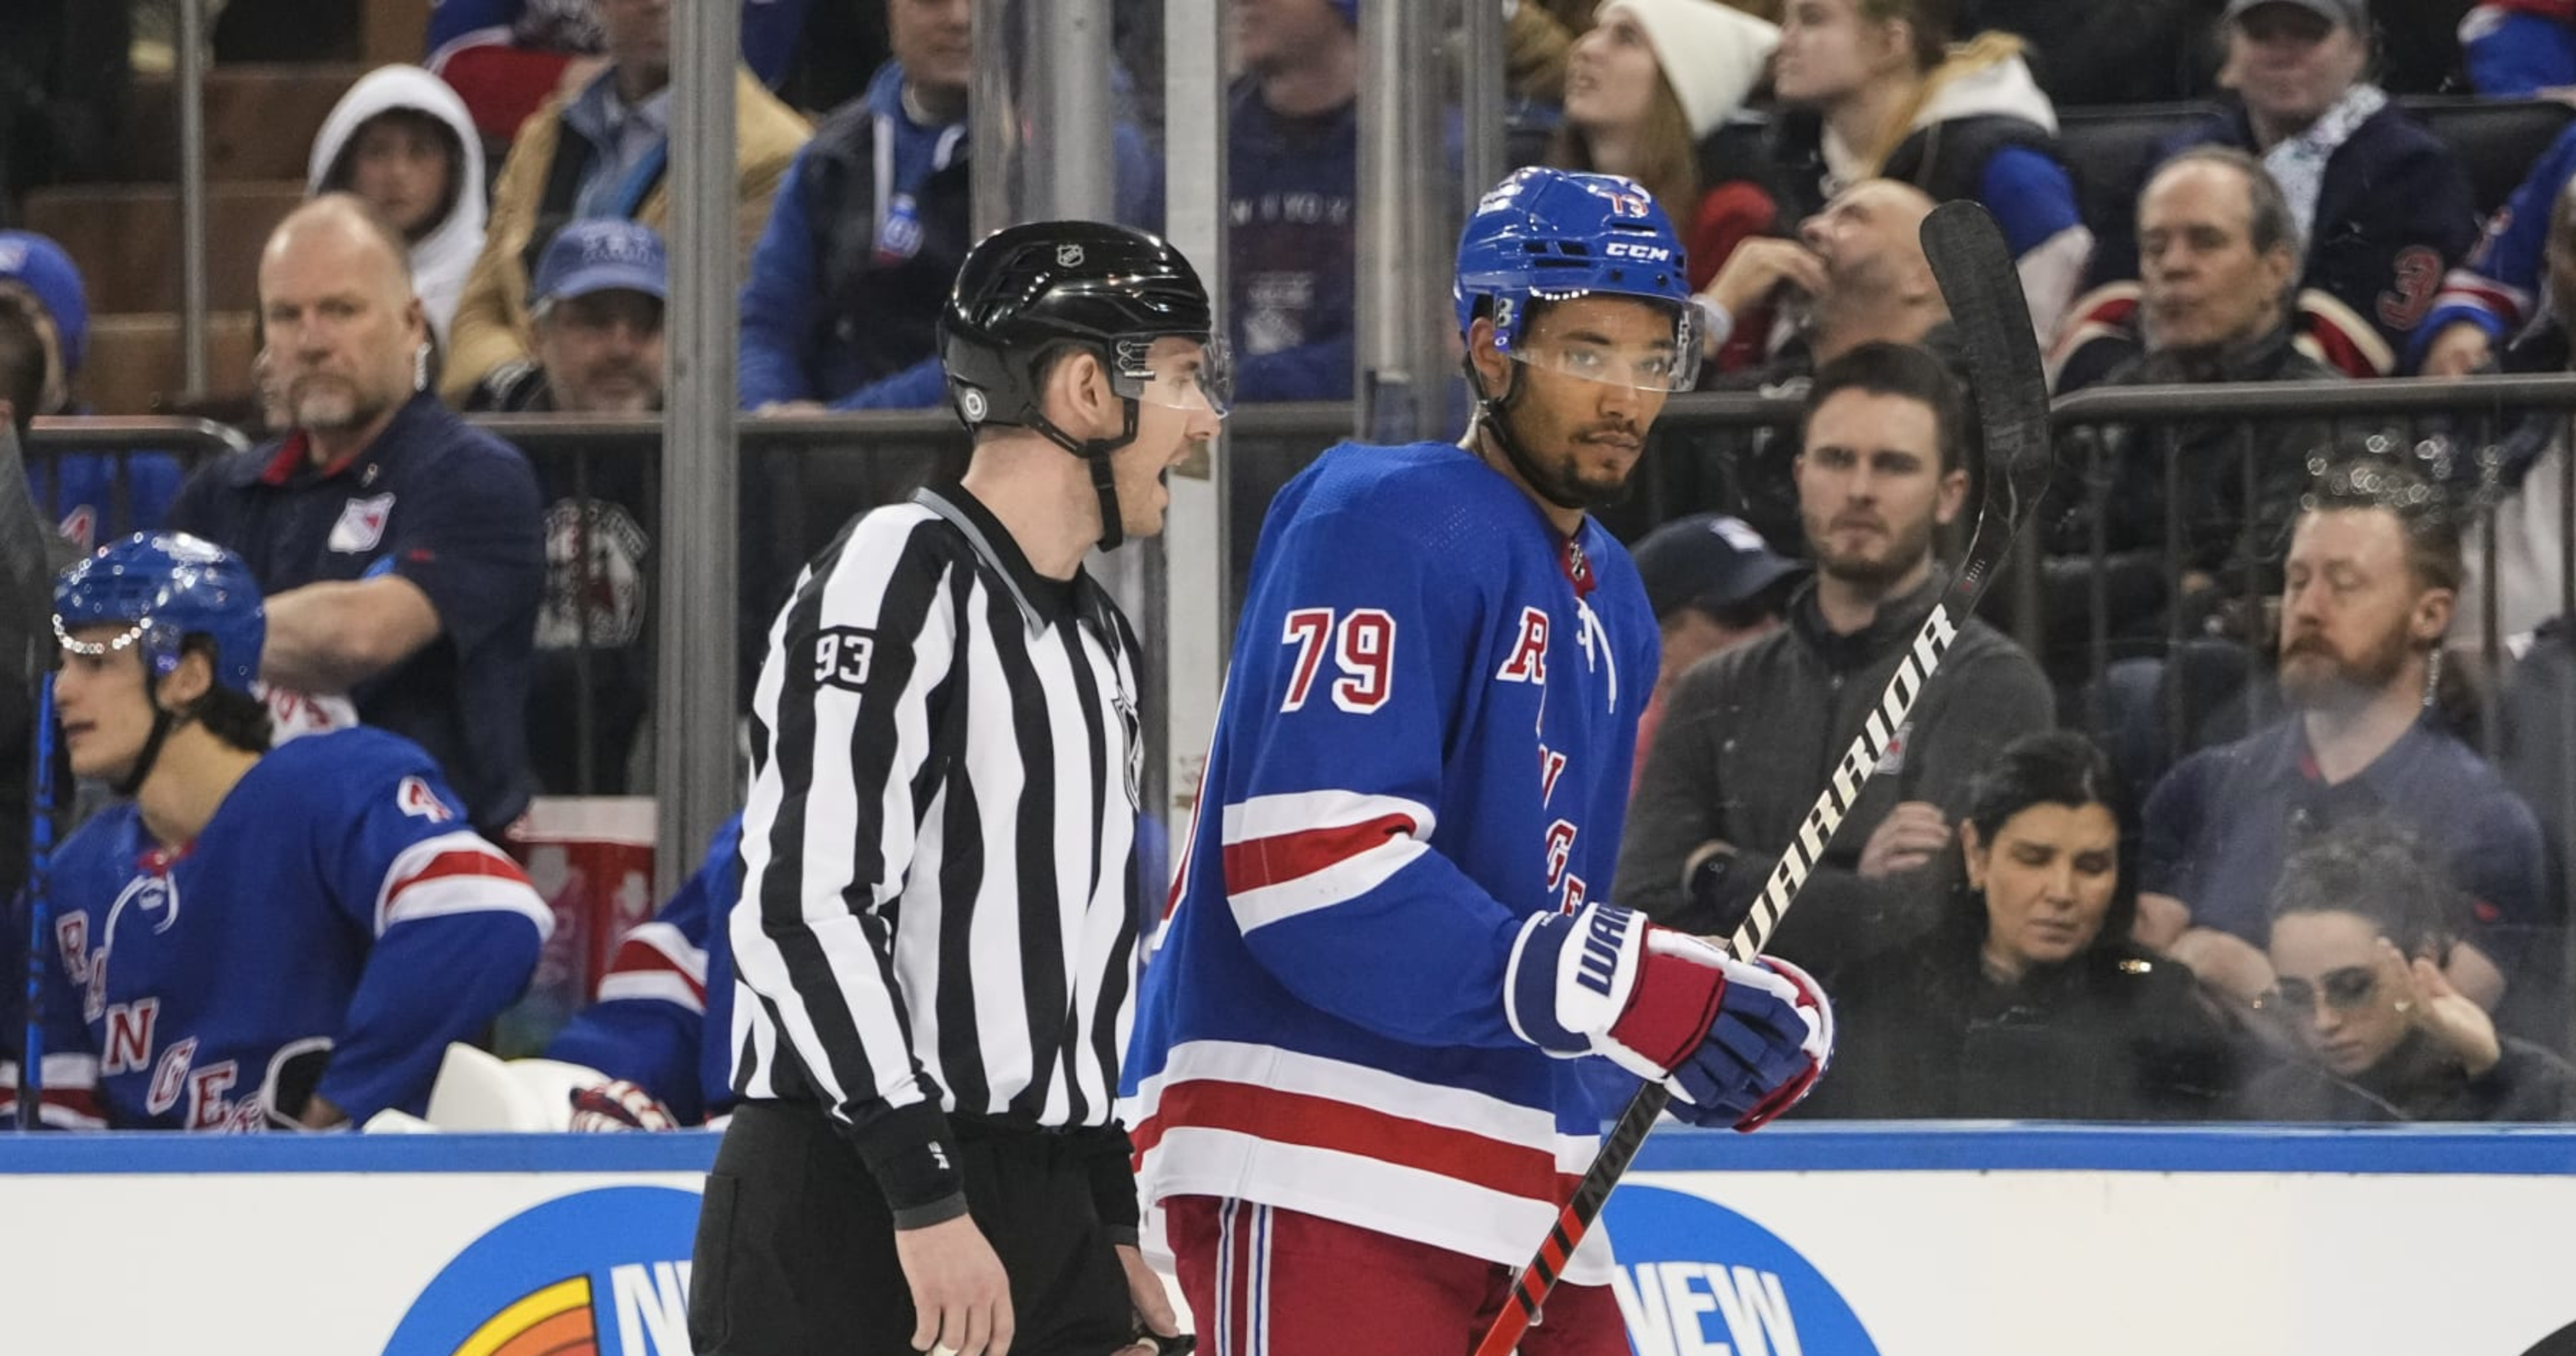 Carpenter, Schneider dressed but not playing for Rangers